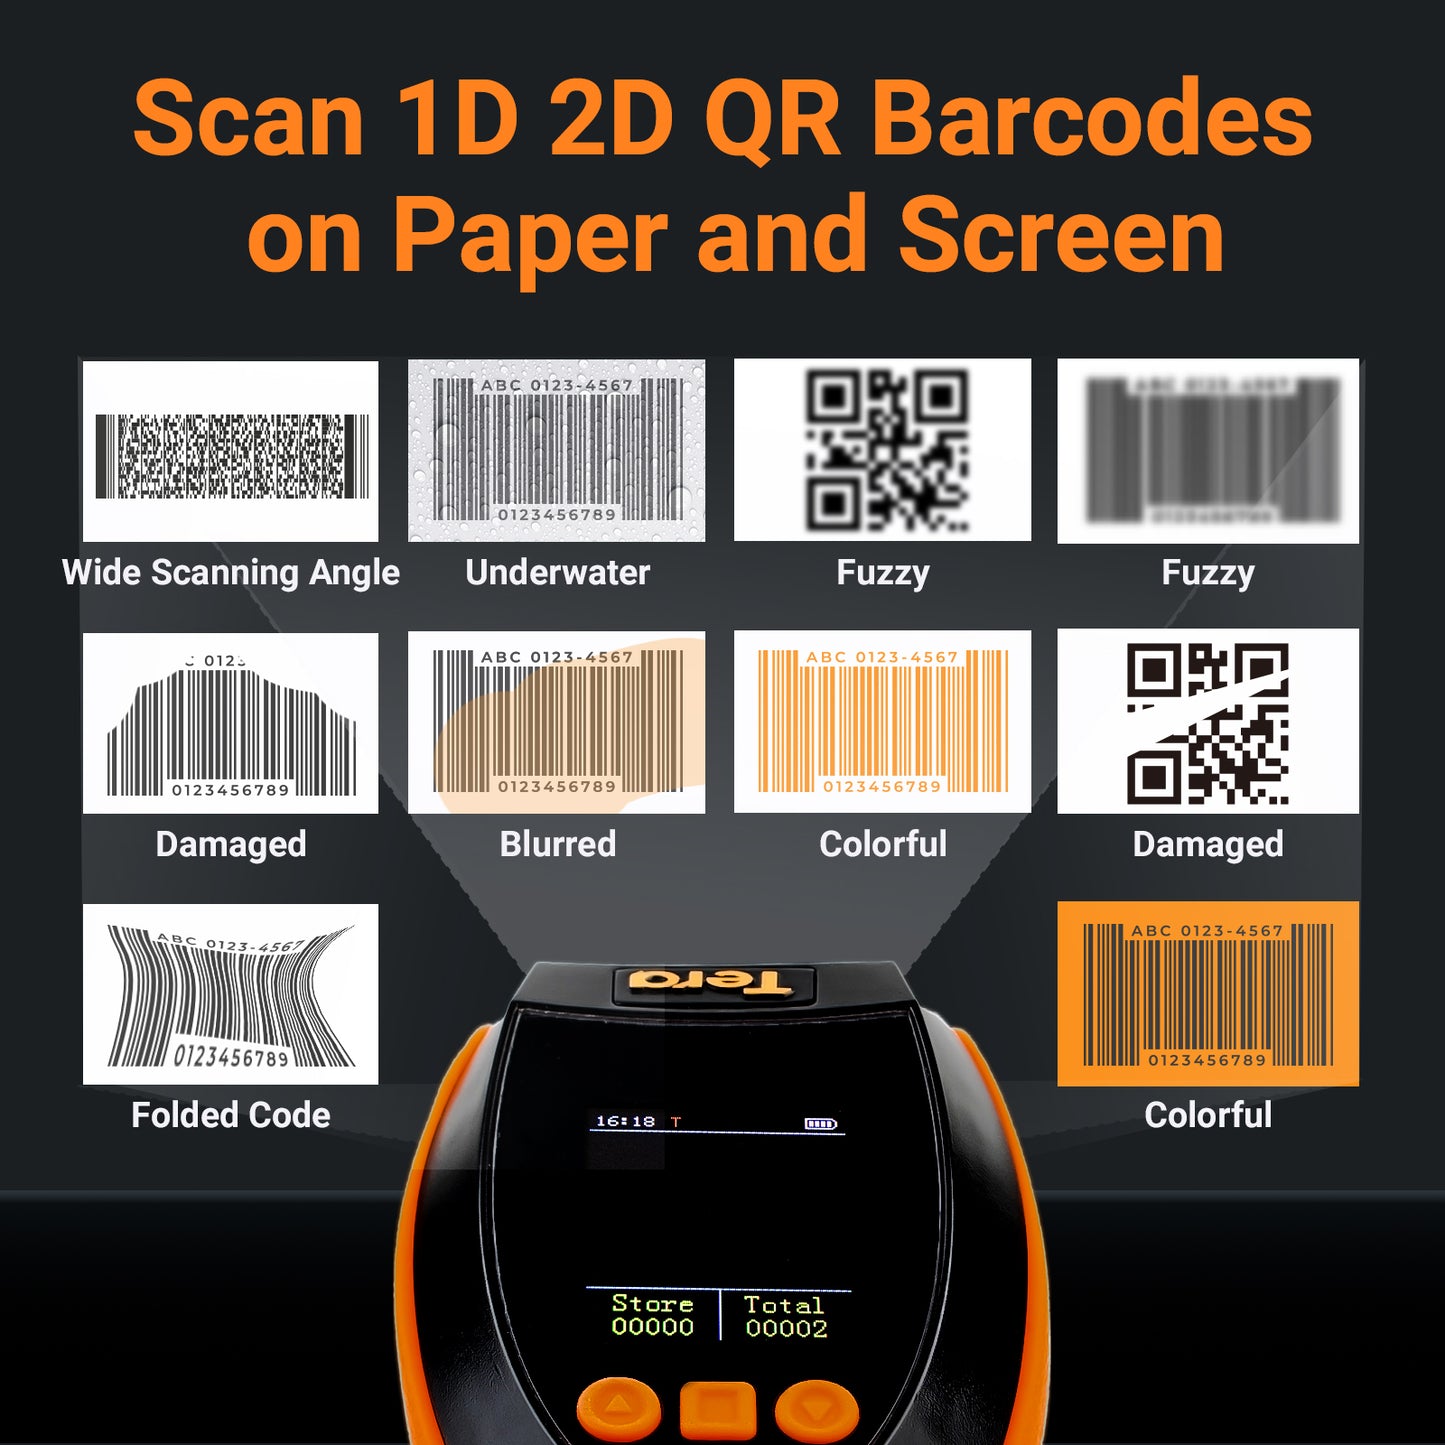 tera-hw0009-2d-wireless-barcode-scanner-with-display-screen